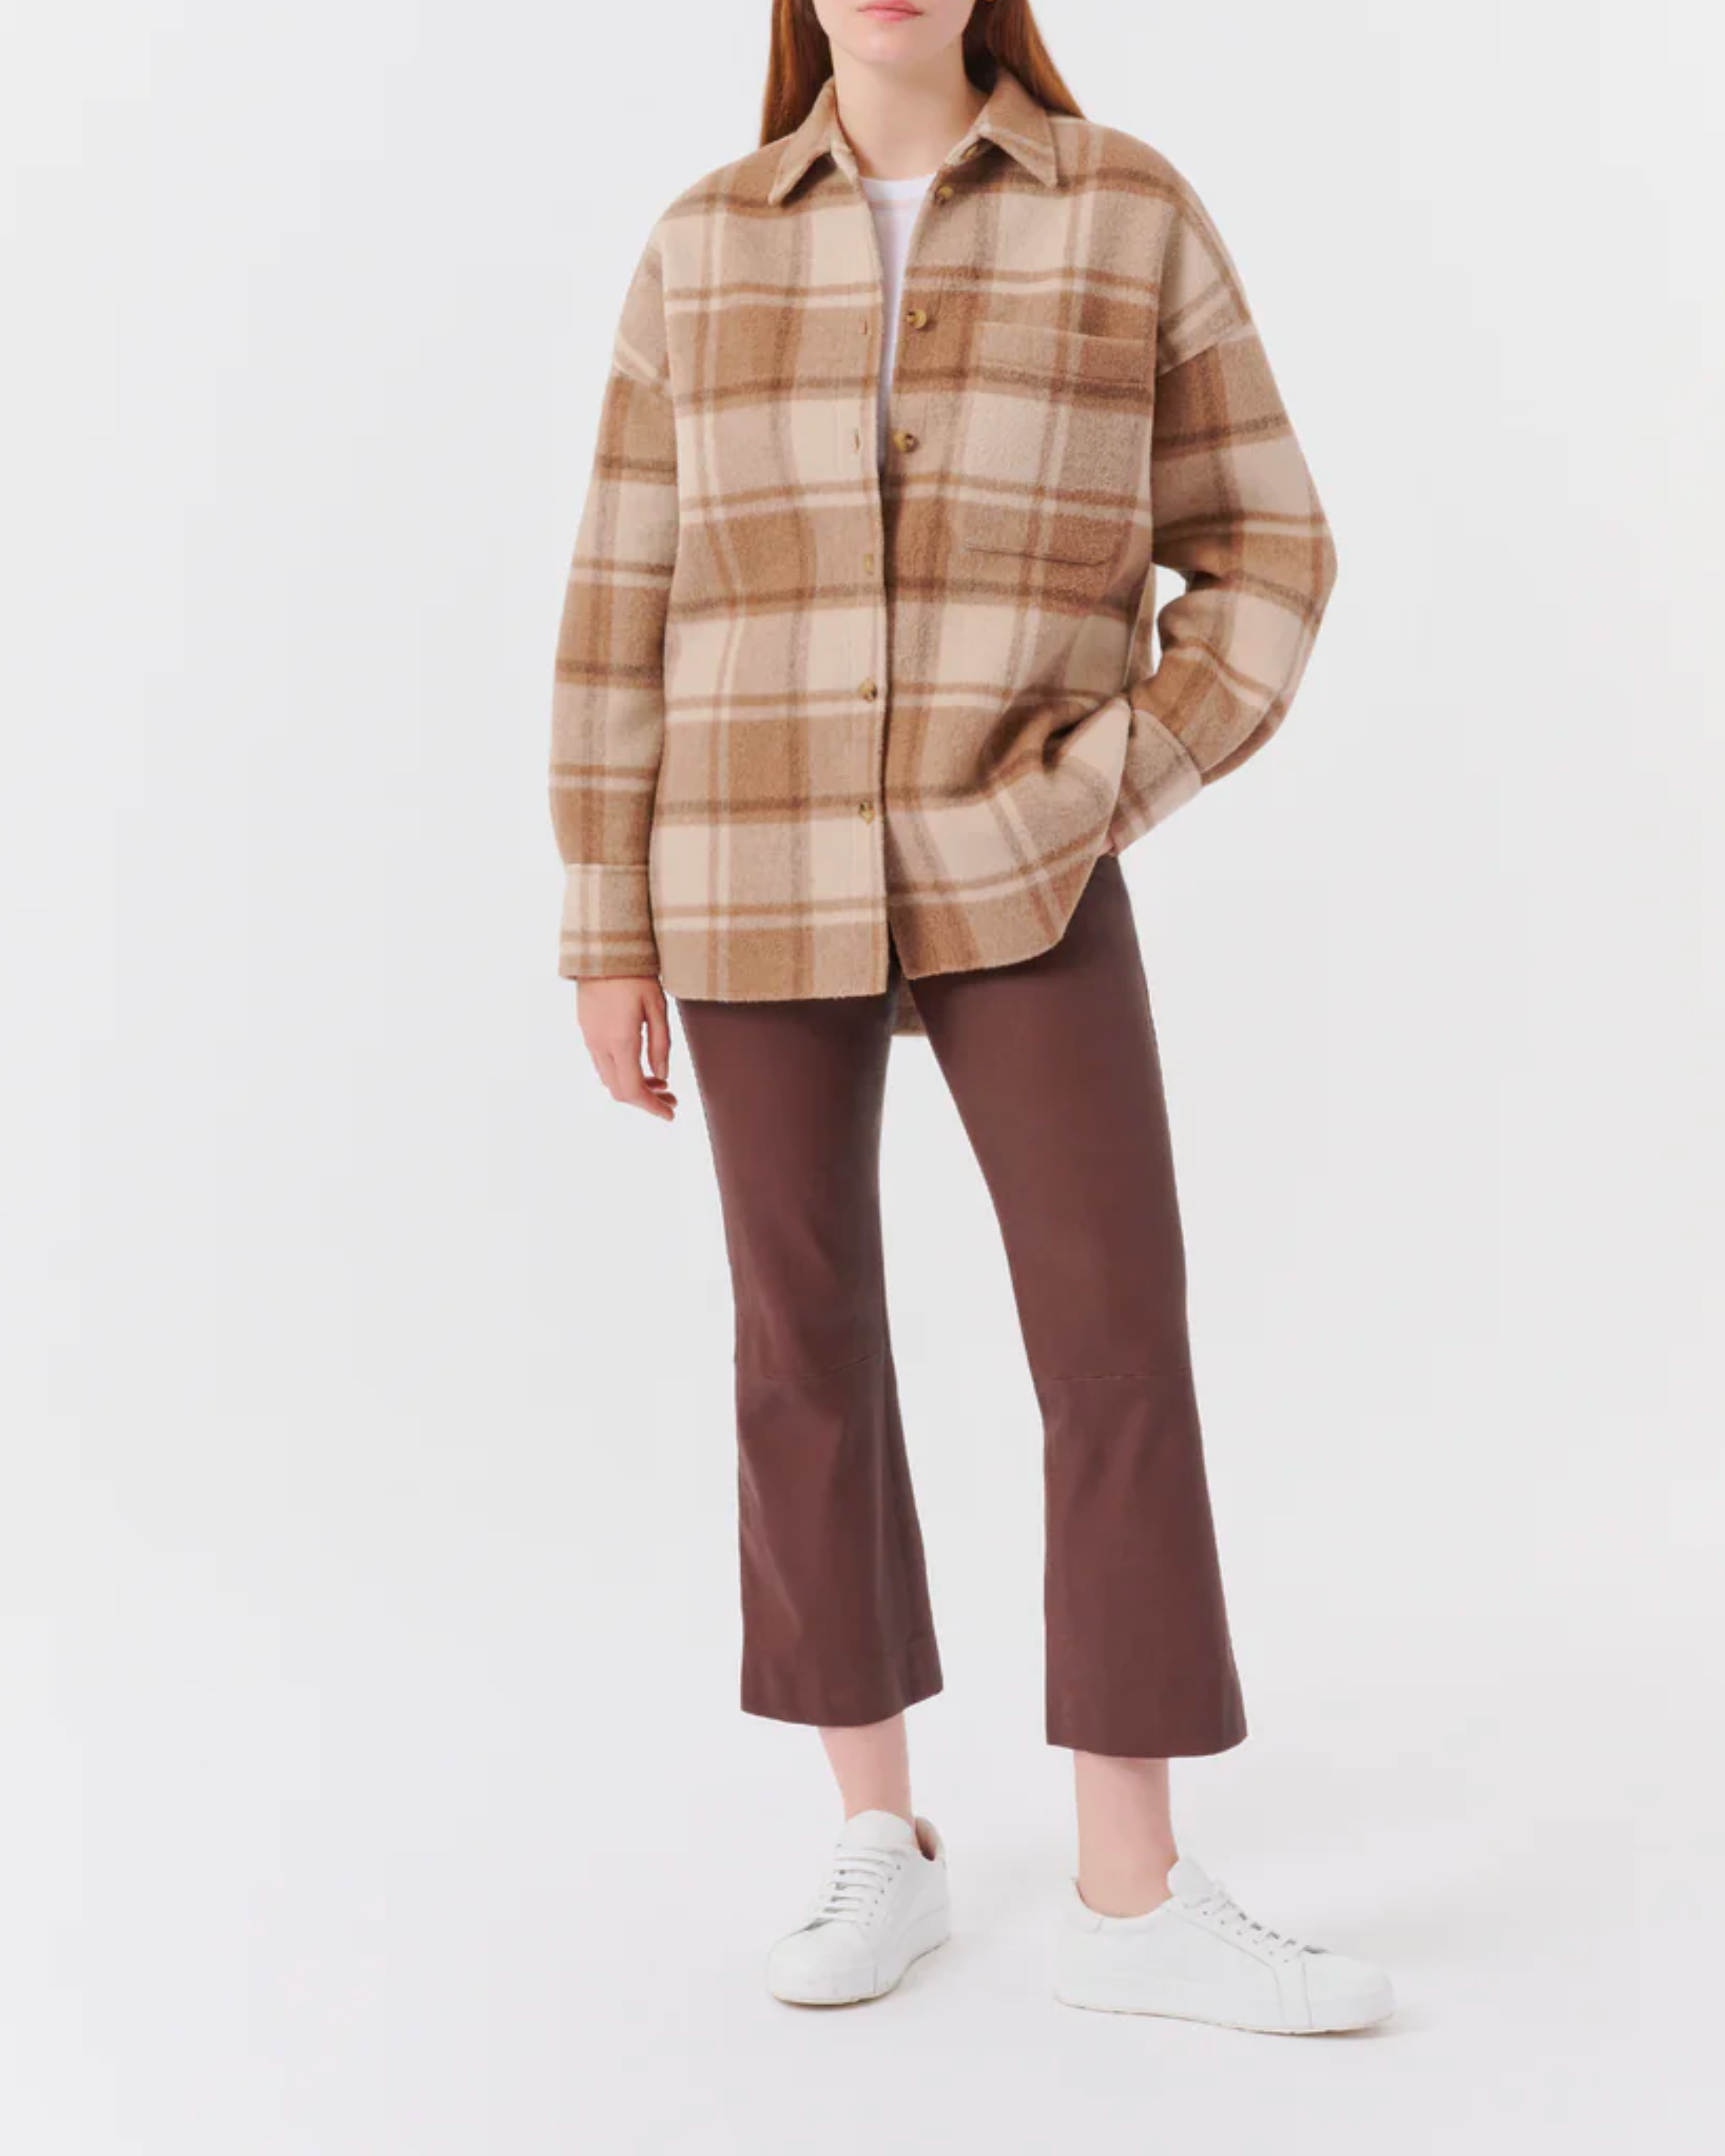 ATM Plaid Flannel Tomboy Shirt in Natural Beige